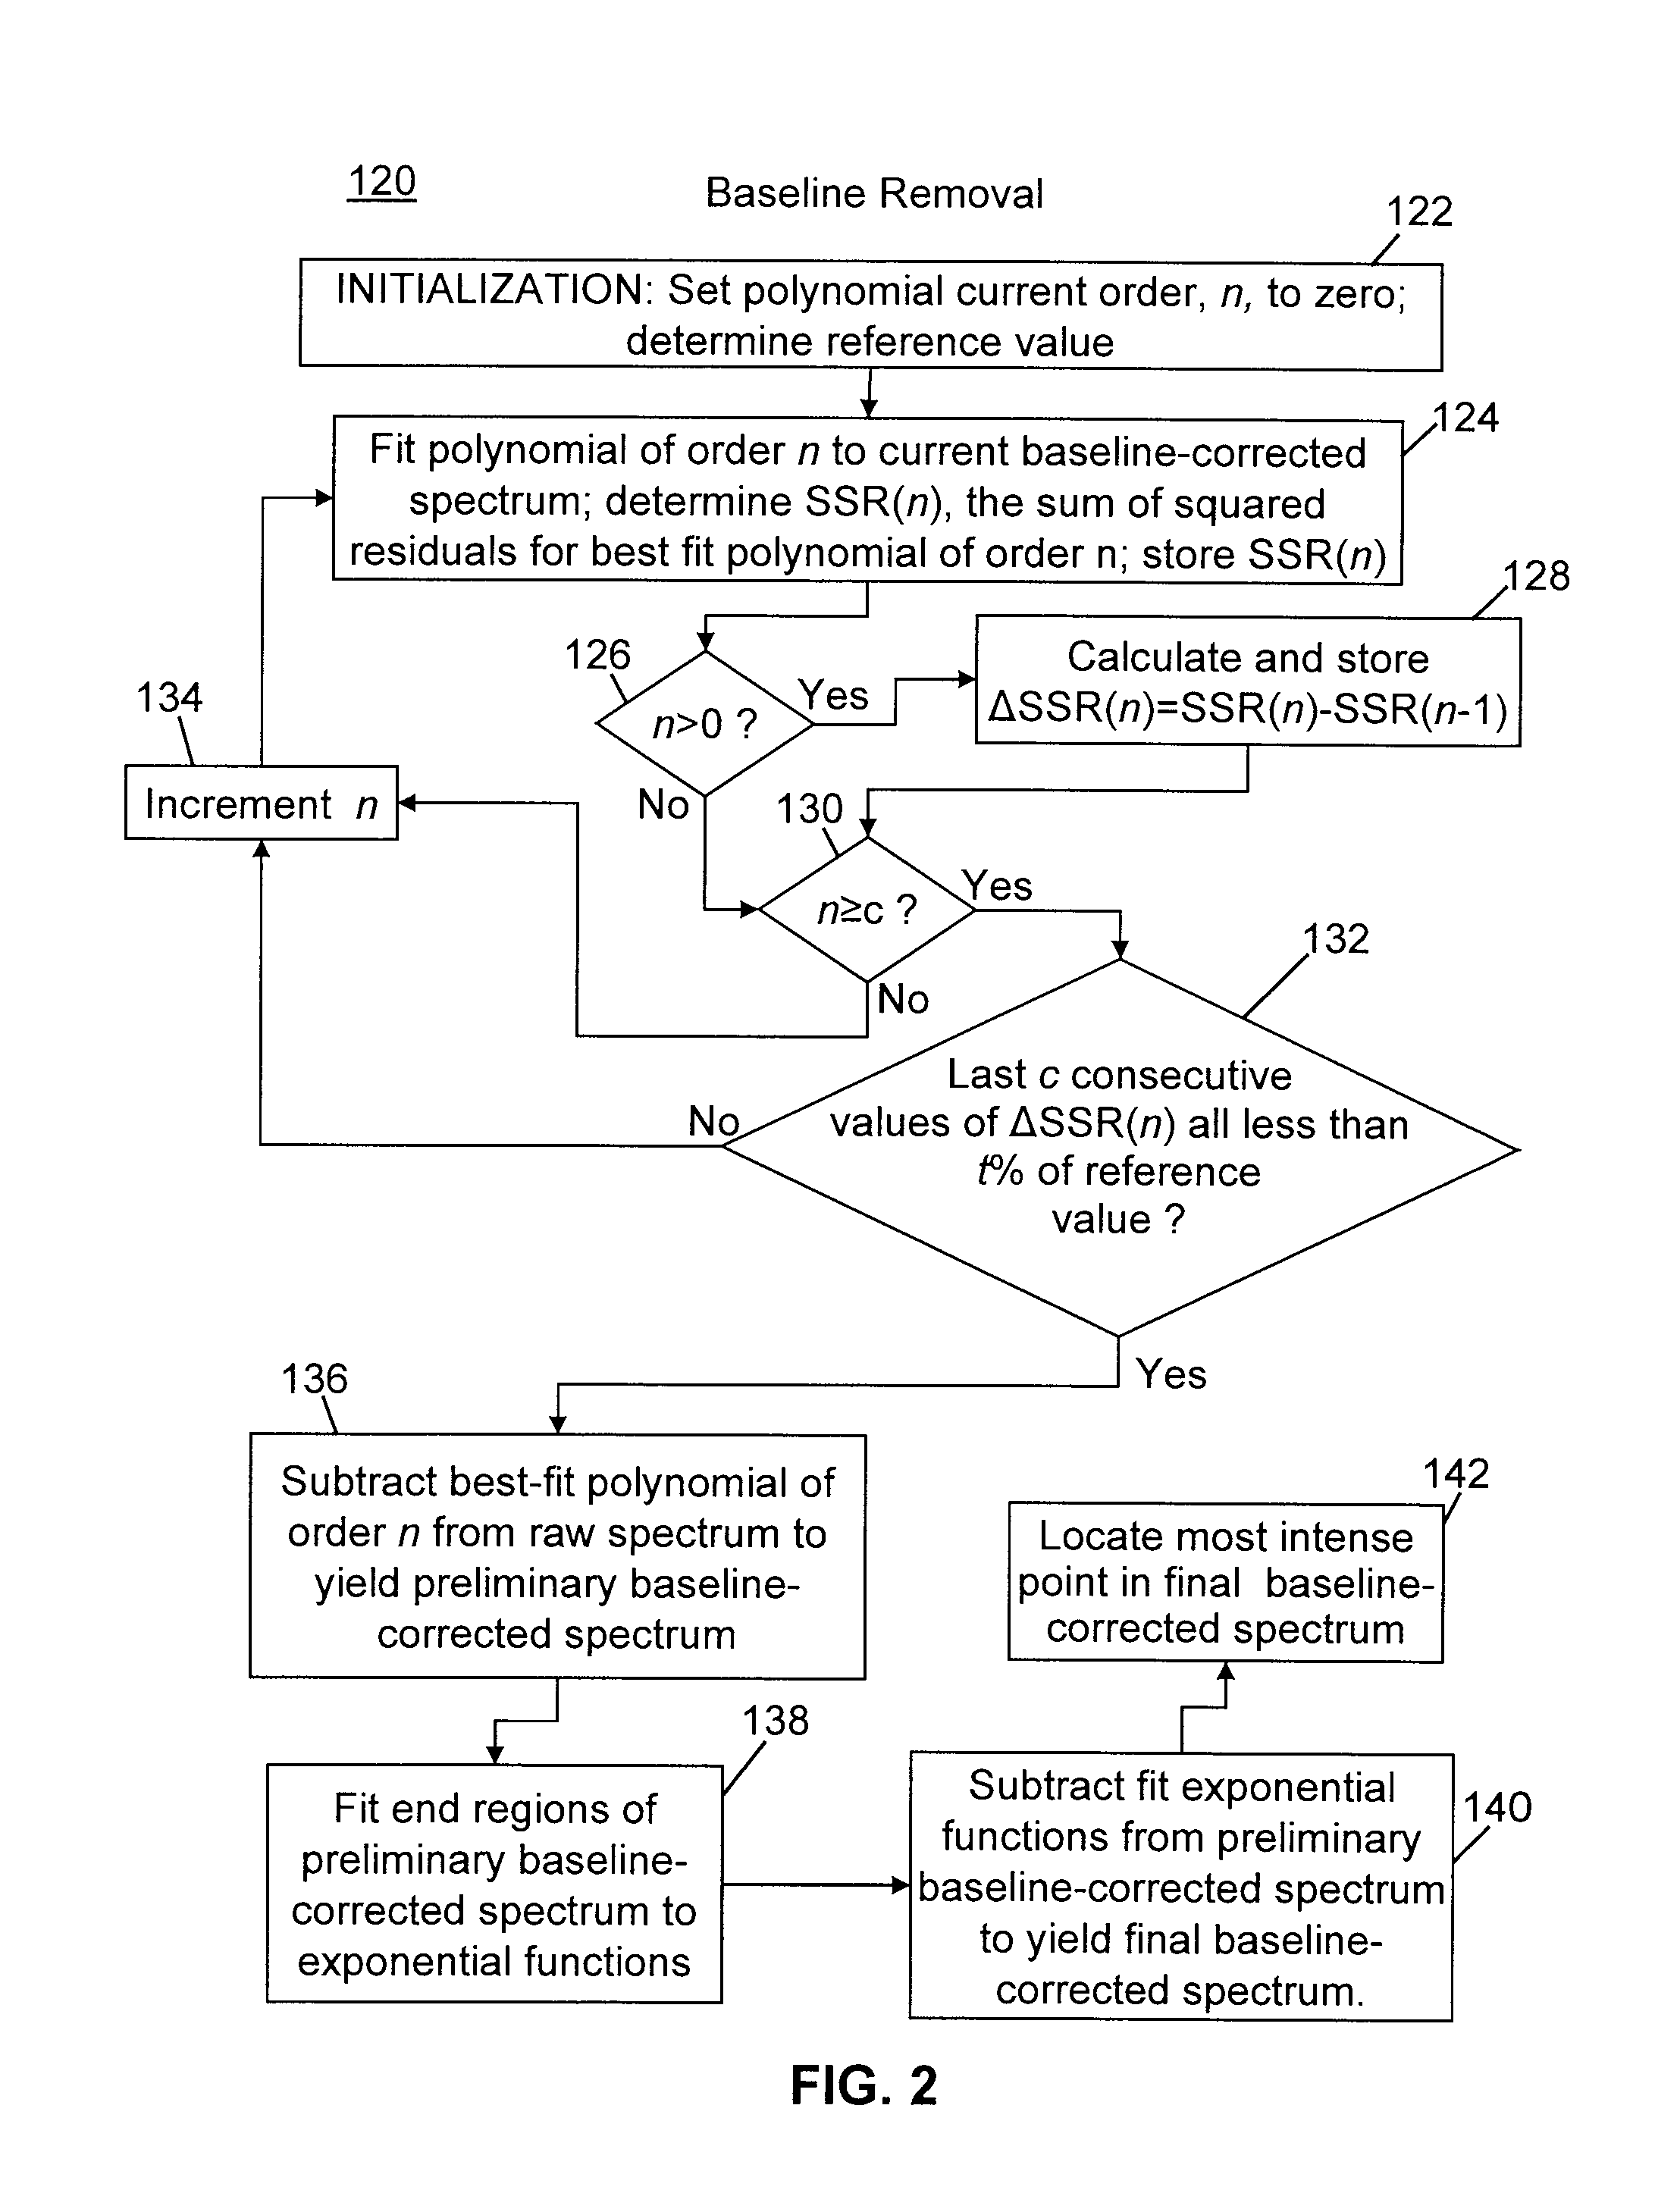 Methods of automated spectral peak detection and quantification having learning mode